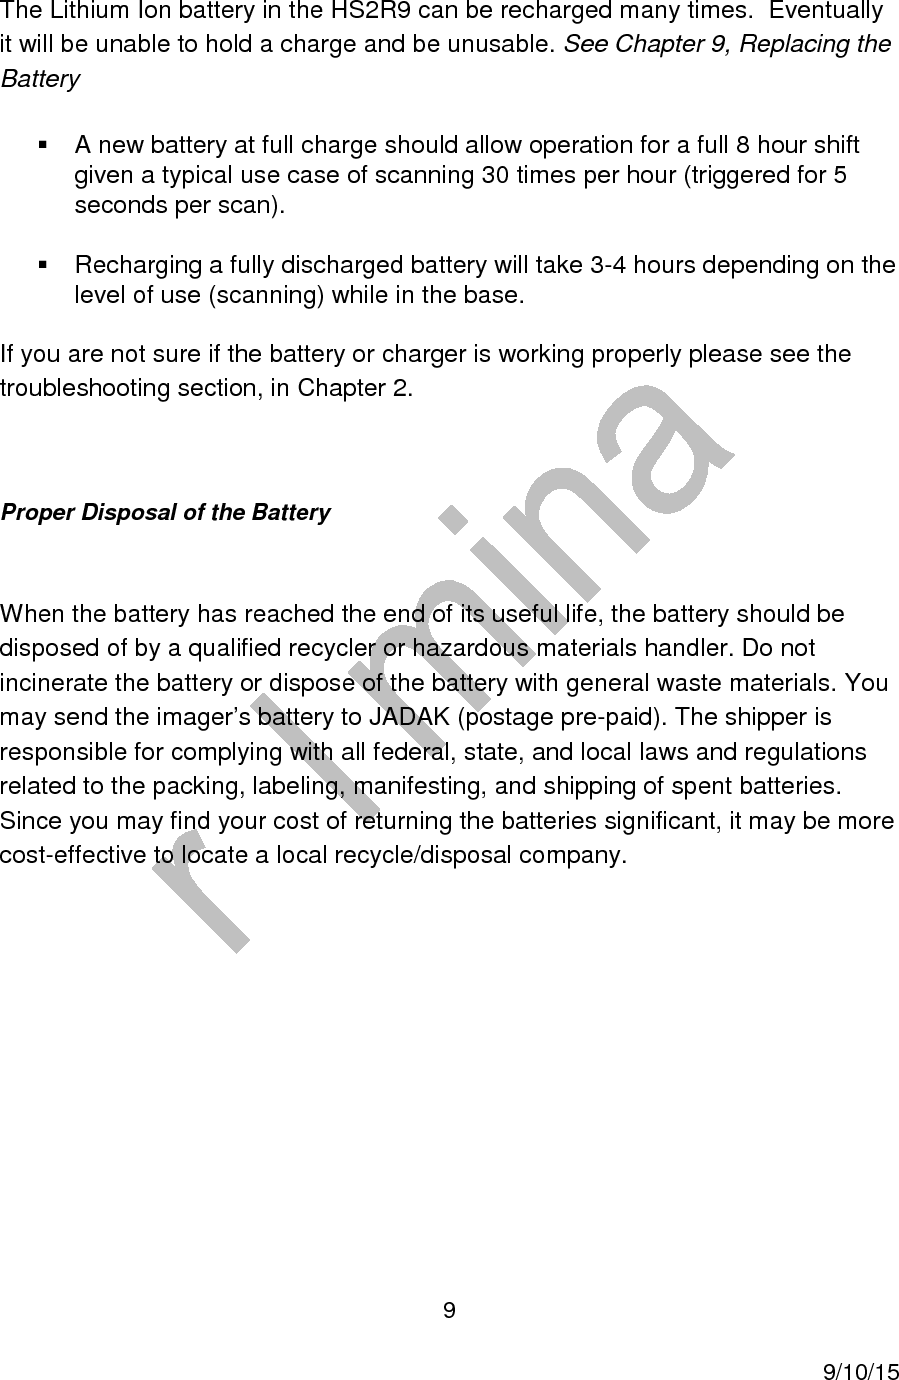  9     9/10/15 The Lithium Ion battery in the HS2R9 can be recharged many times.  Eventually it will be unable to hold a charge and be unusable. See Chapter 9, Replacing the Battery   A new battery at full charge should allow operation for a full 8 hour shift given a typical use case of scanning 30 times per hour (triggered for 5 seconds per scan).   Recharging a fully discharged battery will take 3-4 hours depending on the level of use (scanning) while in the base. If you are not sure if the battery or charger is working properly please see the troubleshooting section, in Chapter 2.   Proper Disposal of the Battery     When the battery has reached the end of its useful life, the battery should be disposed of by a qualified recycler or hazardous materials handler. Do not incinerate the battery or dispose of the battery with general waste materials. You may send the imager’s battery to JADAK (postage pre-paid). The shipper is responsible for complying with all federal, state, and local laws and regulations related to the packing, labeling, manifesting, and shipping of spent batteries. Since you may find your cost of returning the batteries significant, it may be more cost-effective to locate a local recycle/disposal company.        